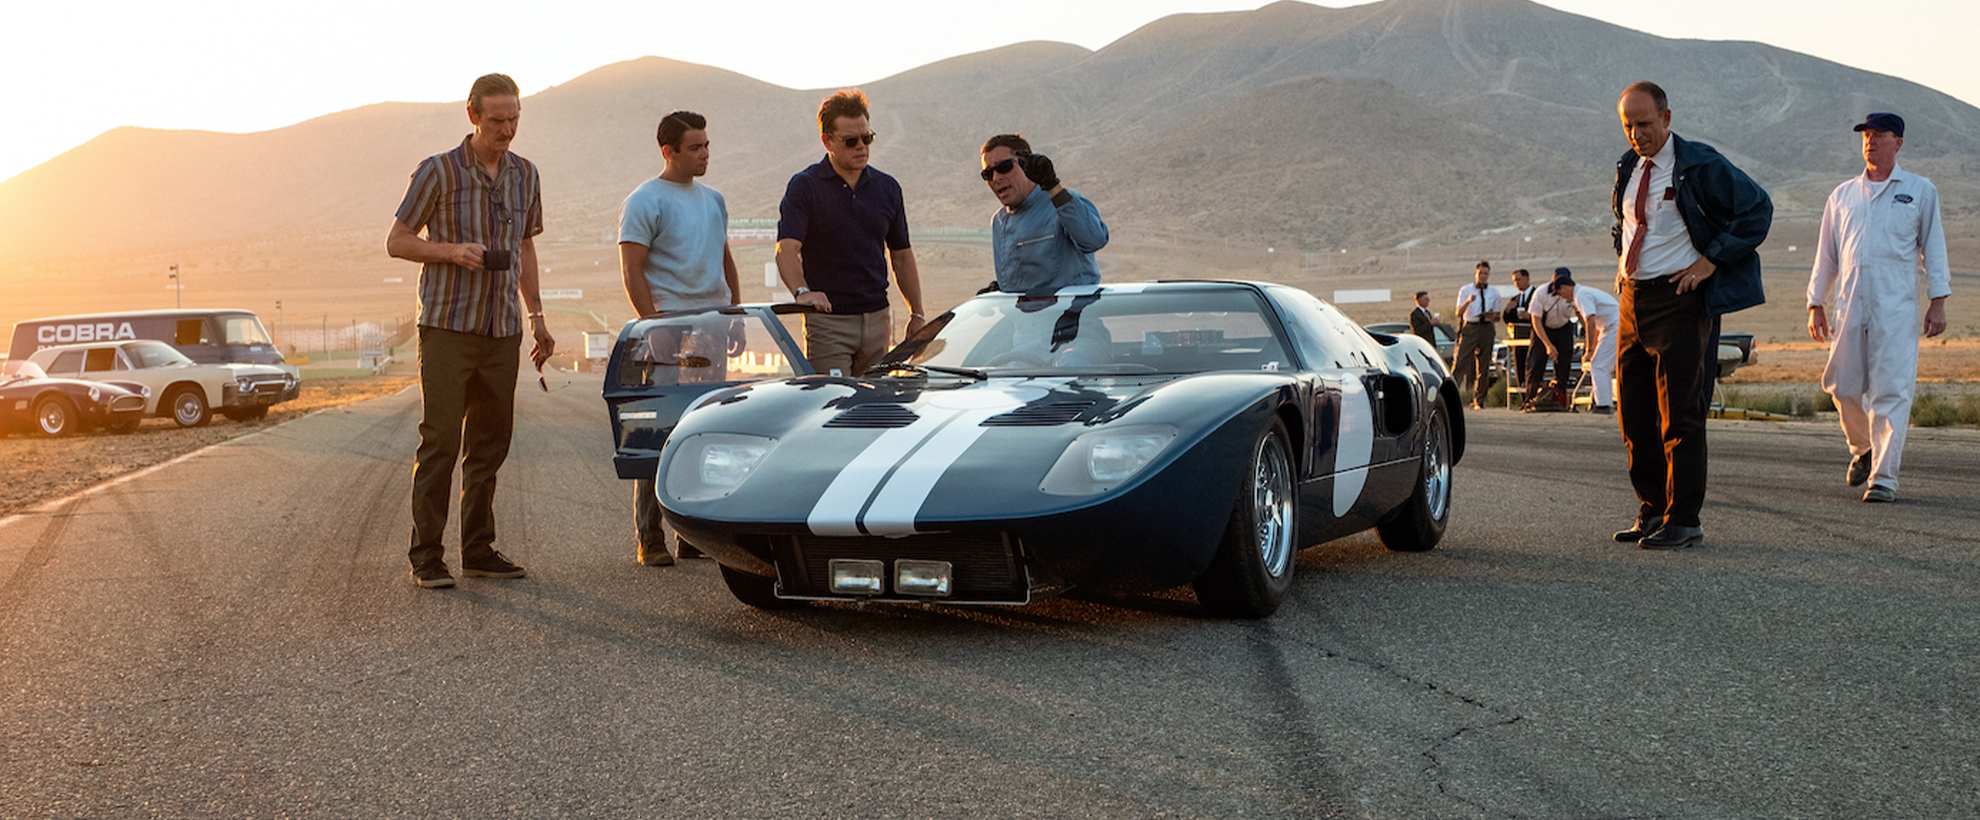 The cast of Ford vs Ferrari gather around a parked race car while the sun sets